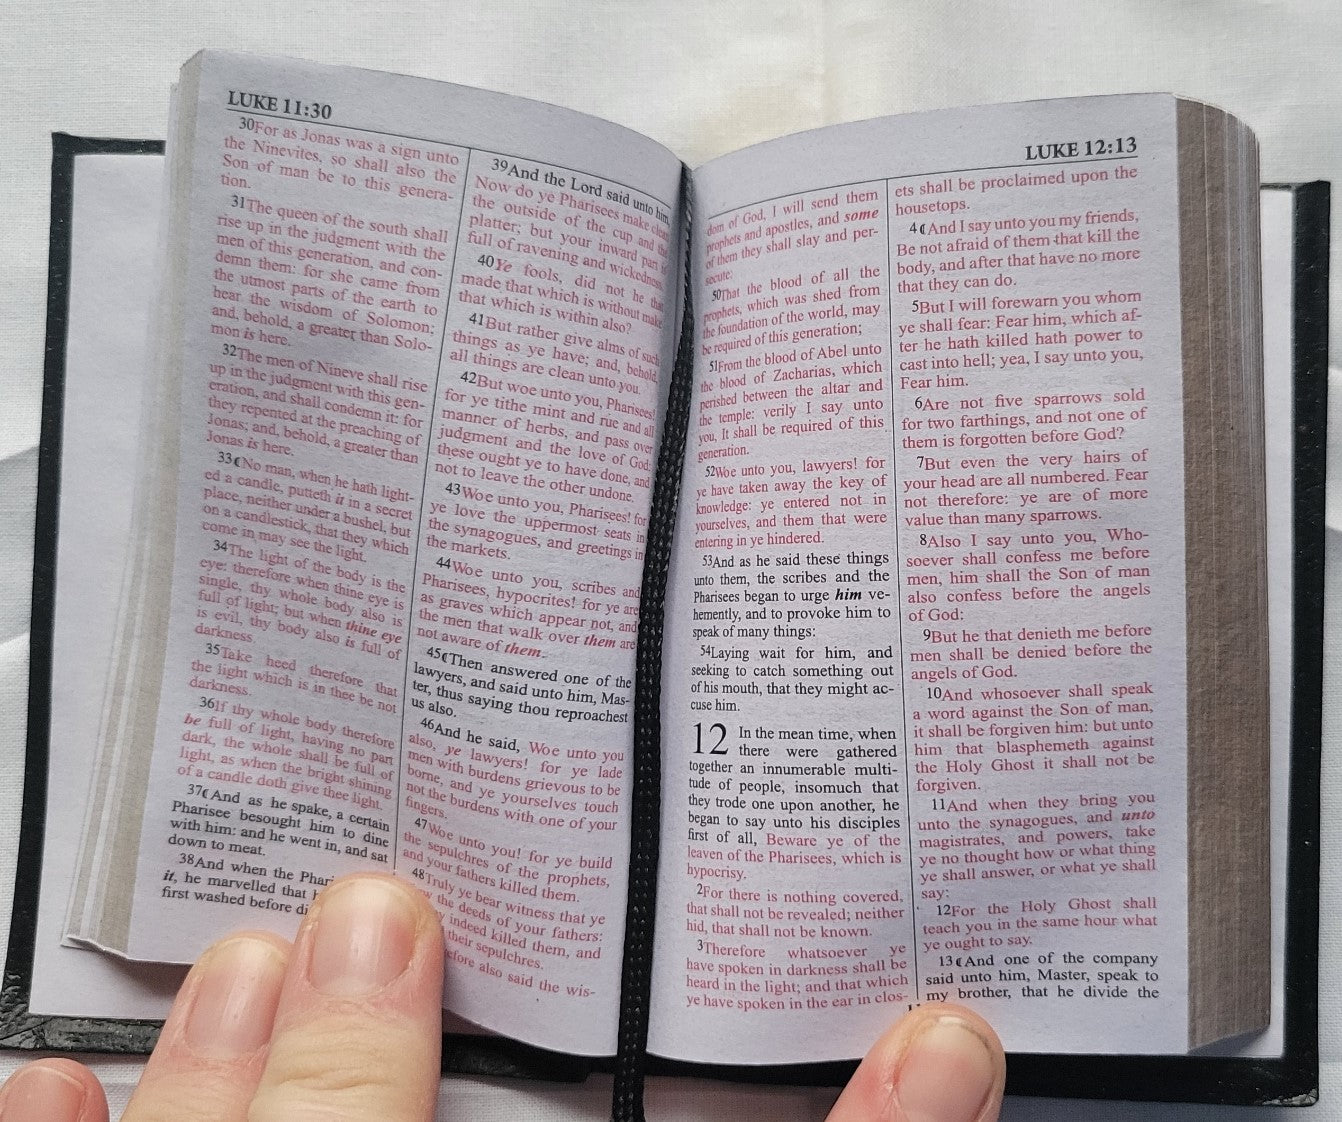 Used book for sale, Pocket size, red letter, King James Version New Testament. View of interior page.